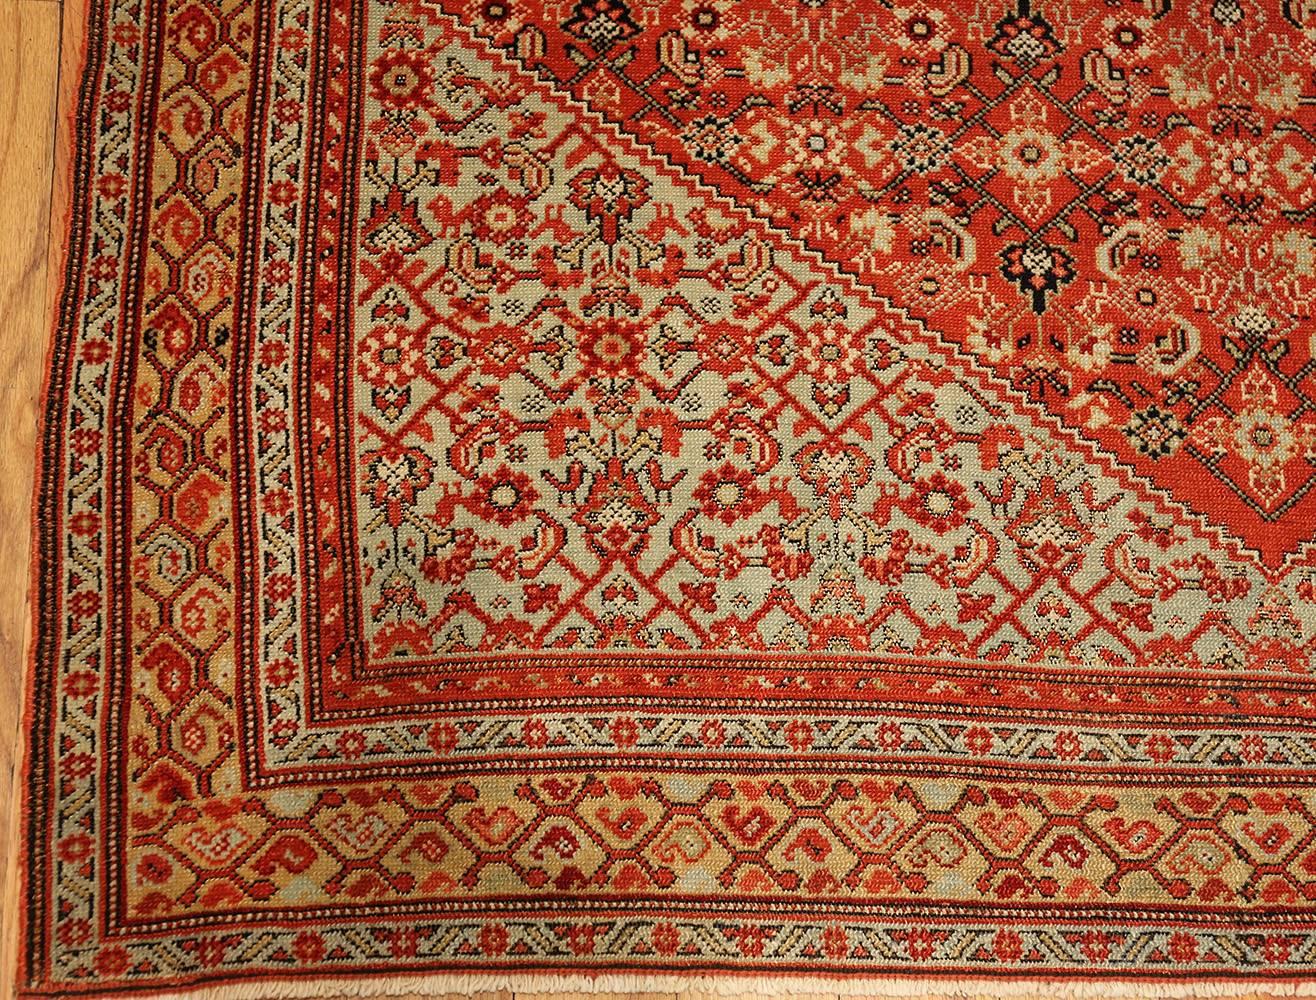 This gorgeous Senneh rug, with its fantastic monumental central medallion, is an absolute delight in a dazzling array of reds.

Fine antique Persian Senneh rug, Origin: Persia, circa 1880. This masterful composition is an exemplary antique Persian